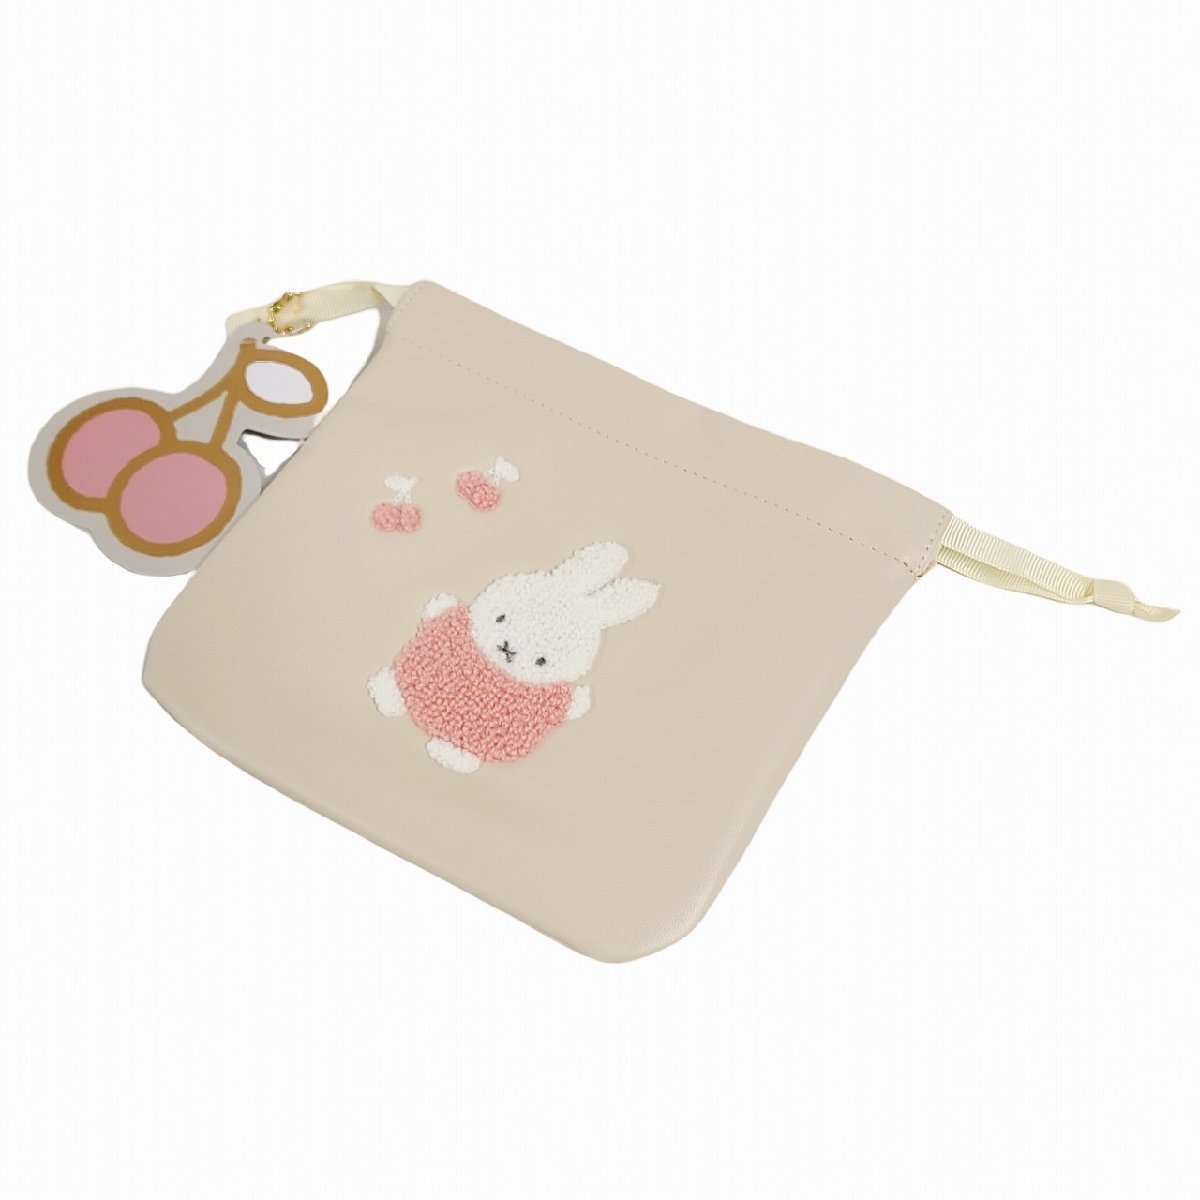 MF pouch pouch Miffy . beautiful . Dick bruna cherry SaGa la embroidery case pouch pouch 